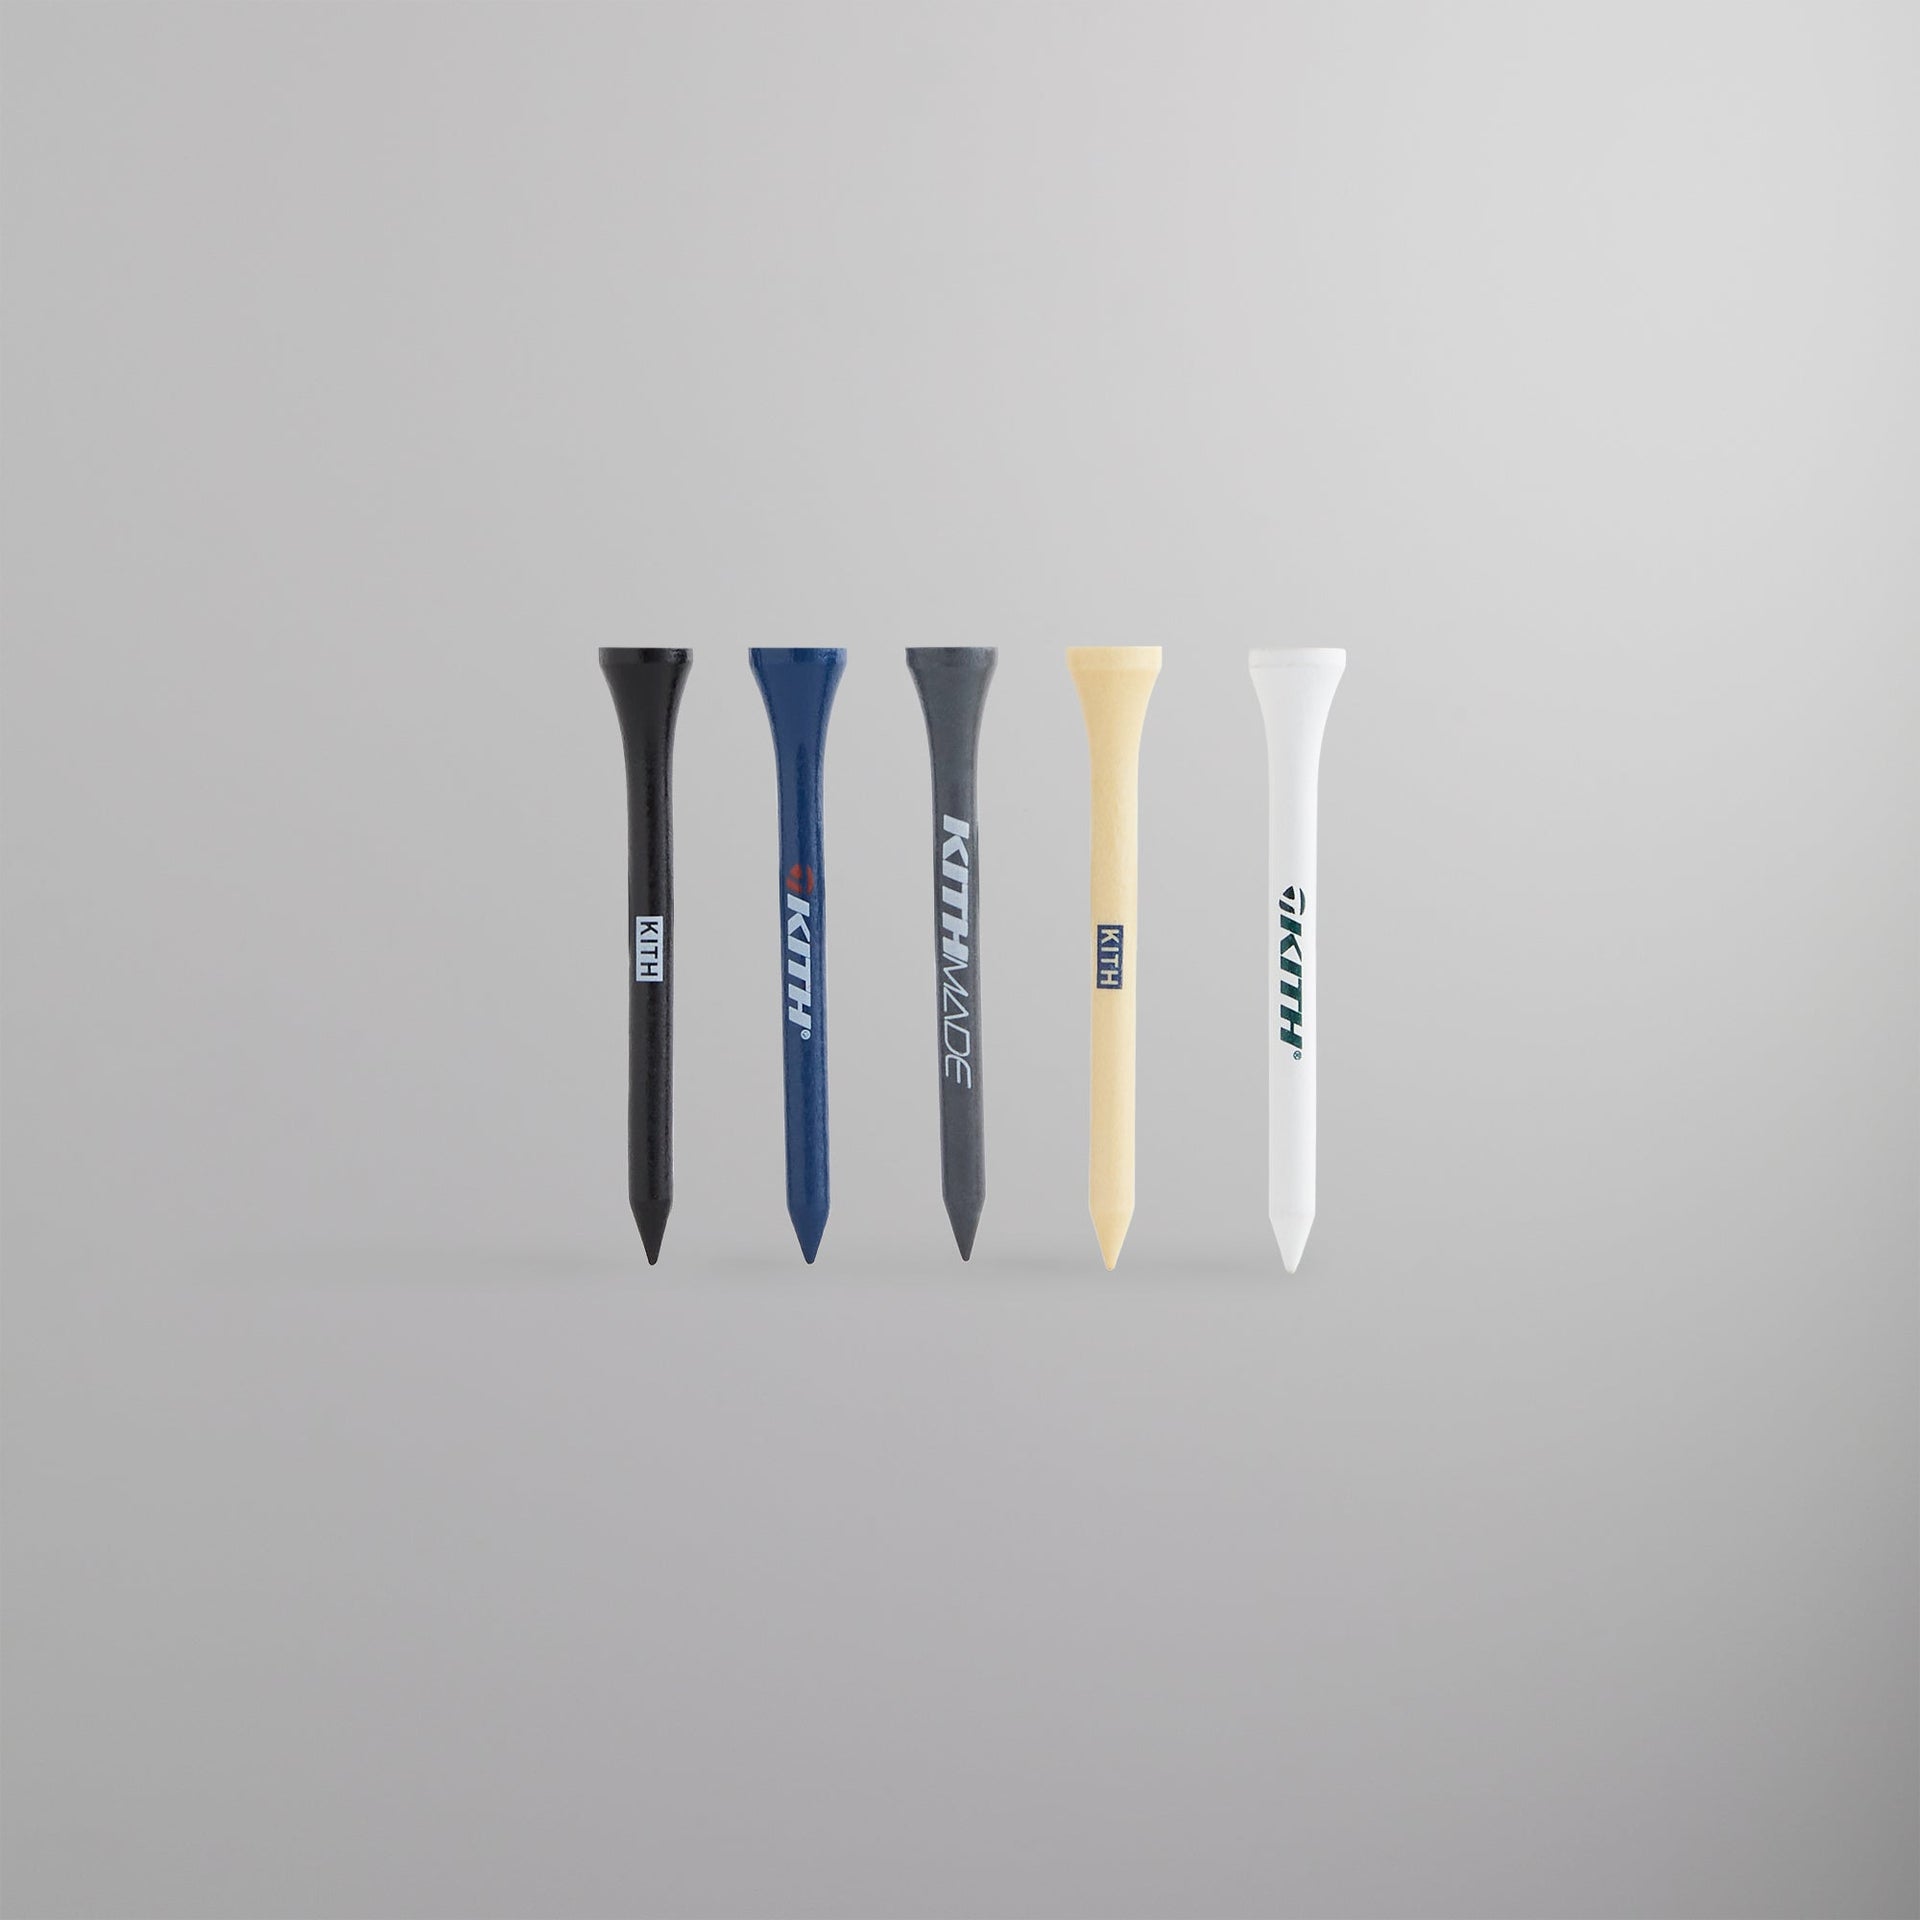 Kith for TaylorMade Golf Tees Mix Pack